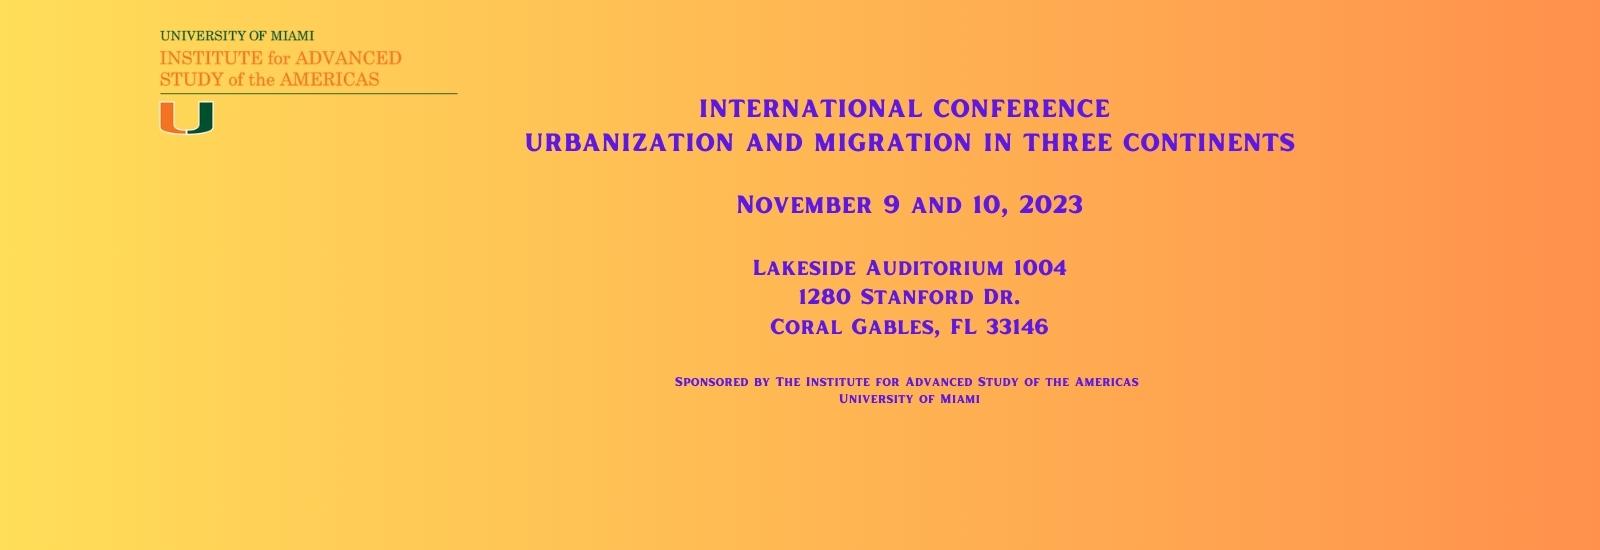 international-conference-urbanization-and-migration-in-three-continents-november-9-and-10-2023-lakeside-pavilion-1000-1280-stanford-dr-coral-gables-fl-33146-sponso-003.jpg